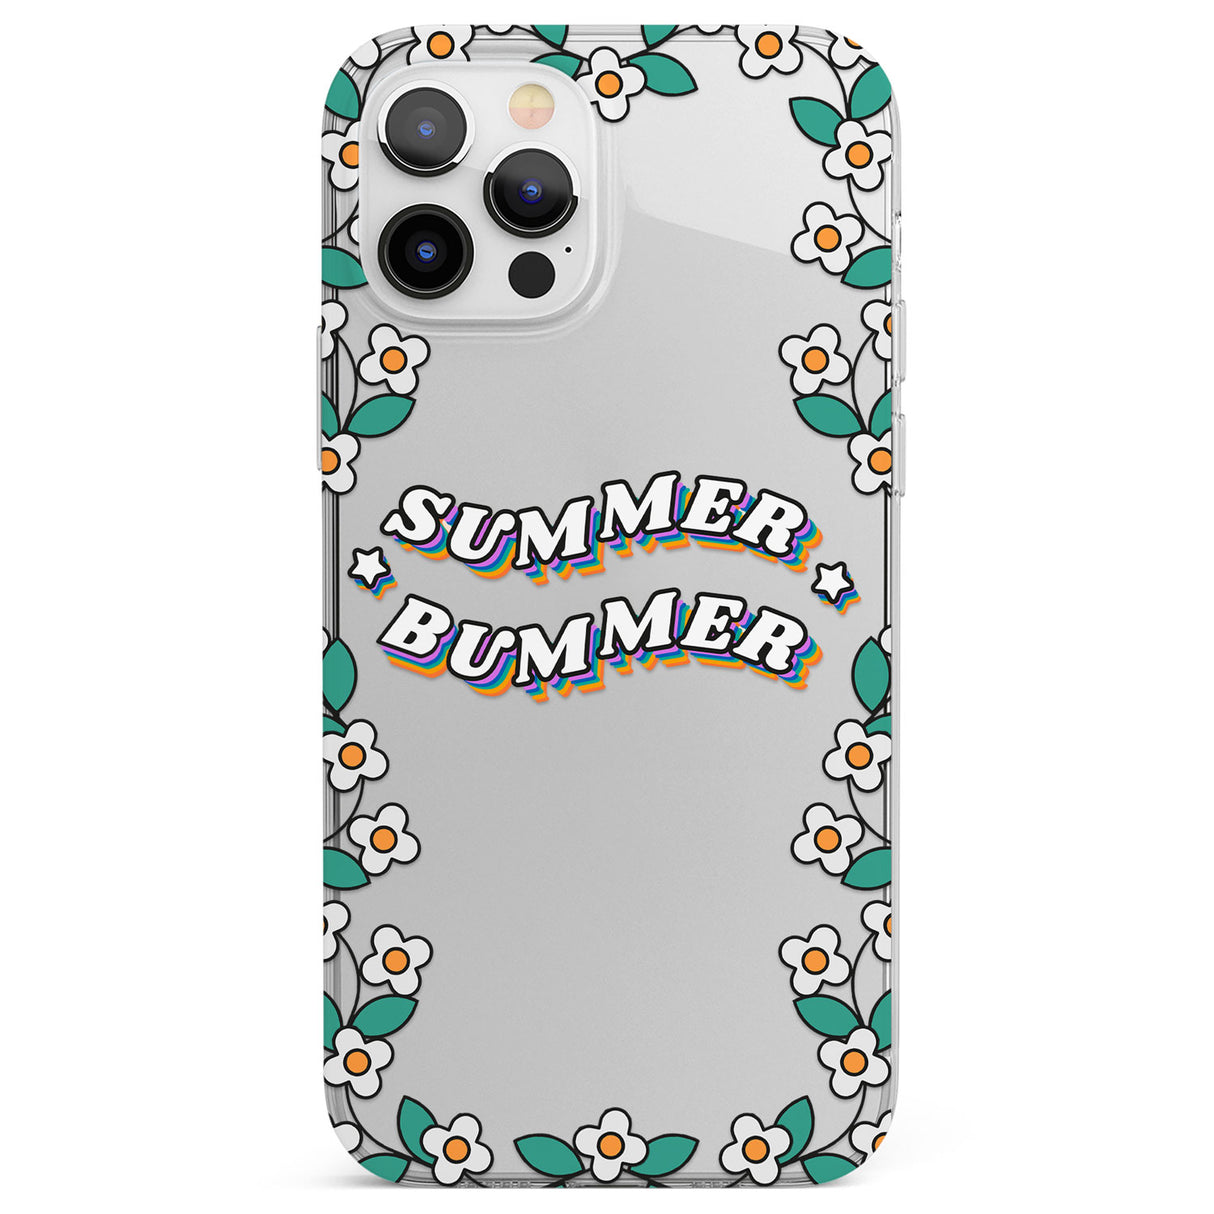 Summer Bummer Phone Case for iPhone 12 Pro